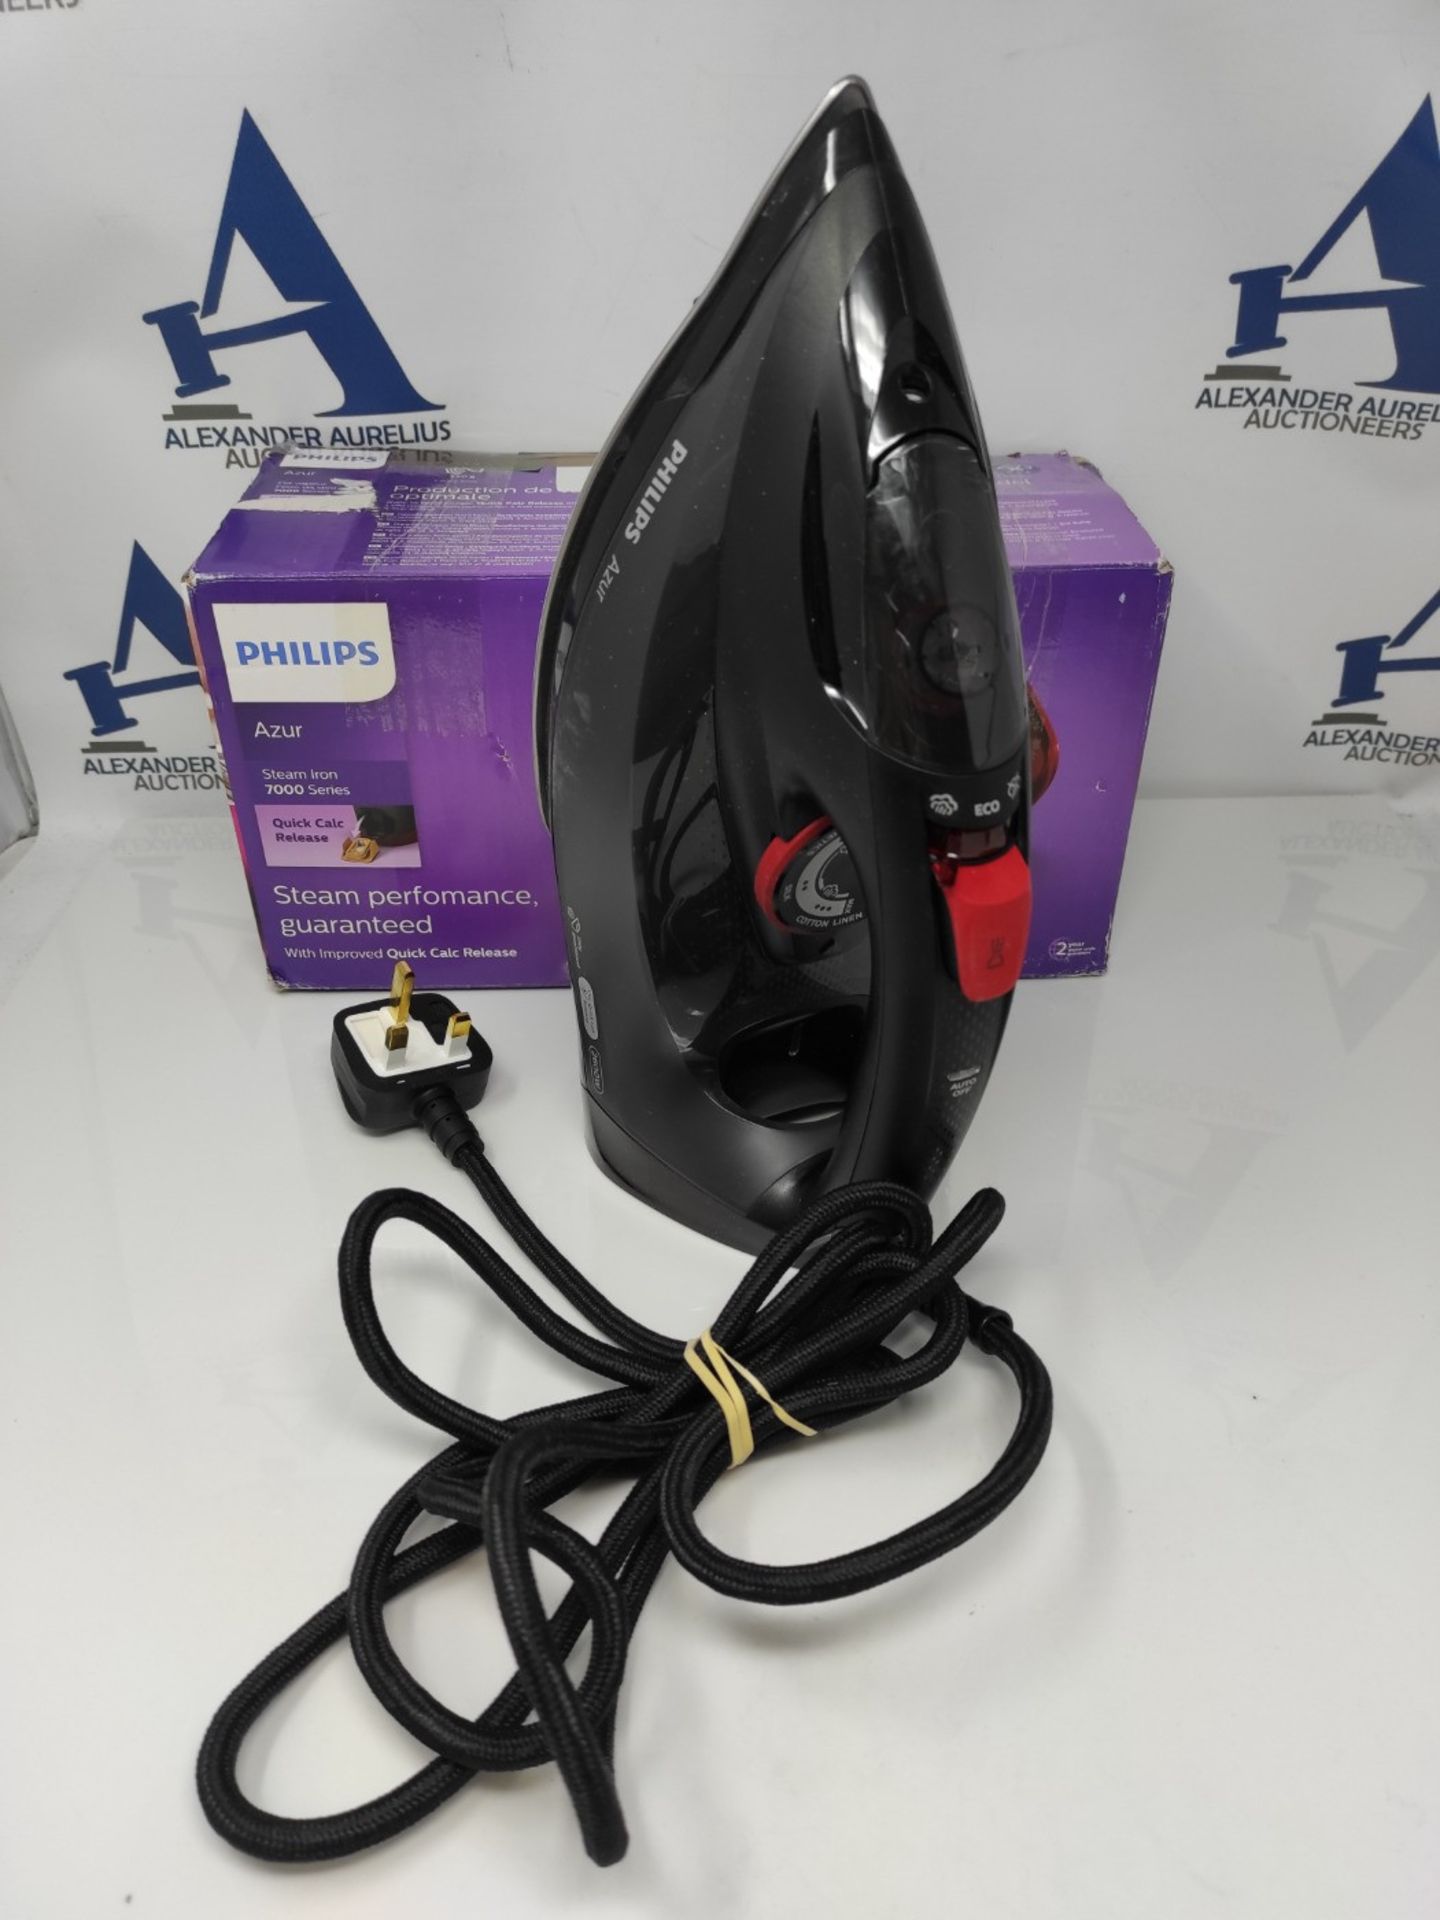 RRP £54.00 Philips Azur Steam Iron - 250 g Steam Boost - 2600 W - With SteamGlide Soleplate - 2.5 - Image 3 of 3